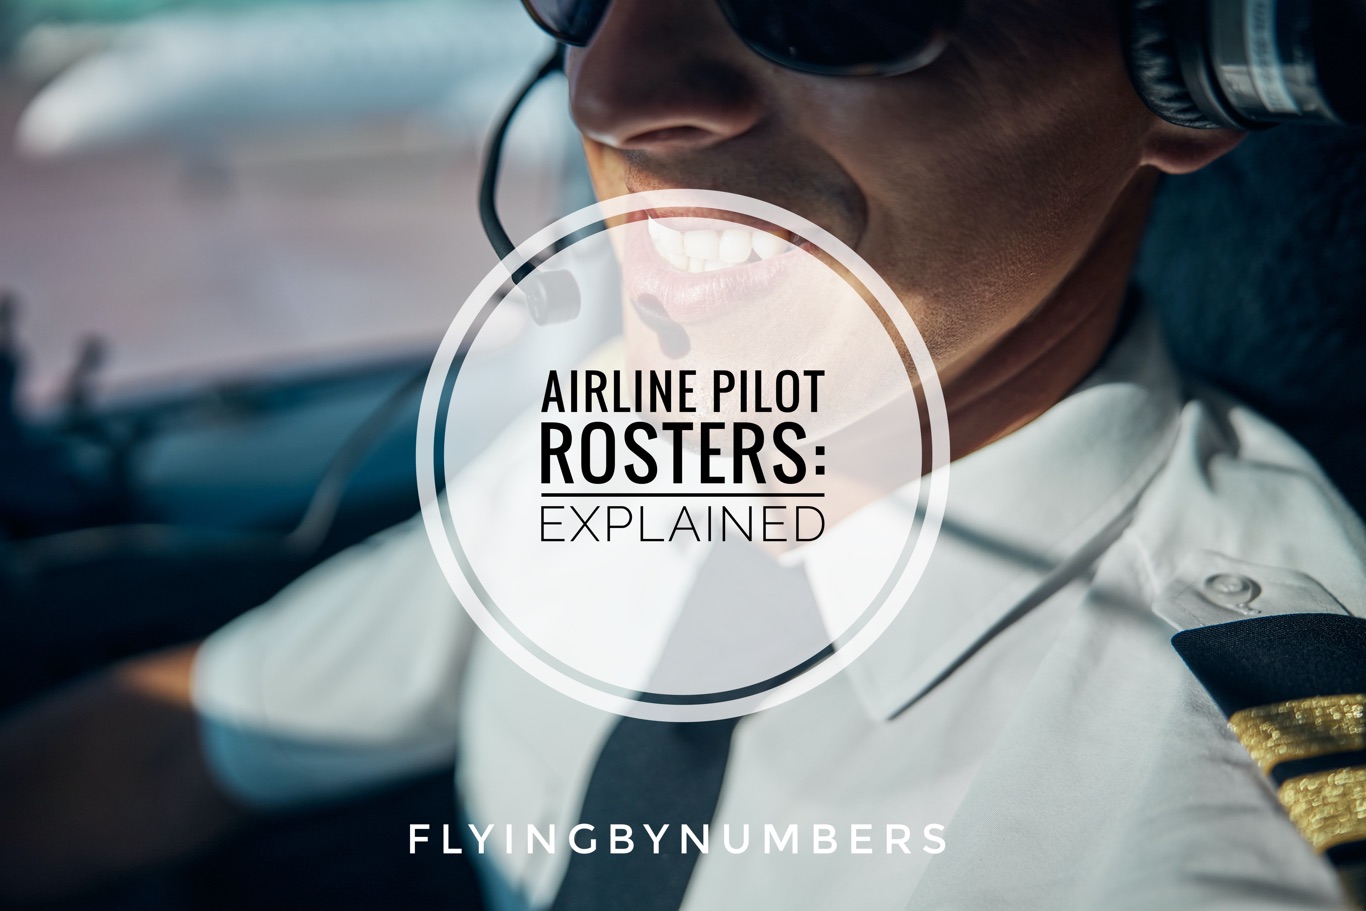 An explanation of airline pilot schedules and rostering codes